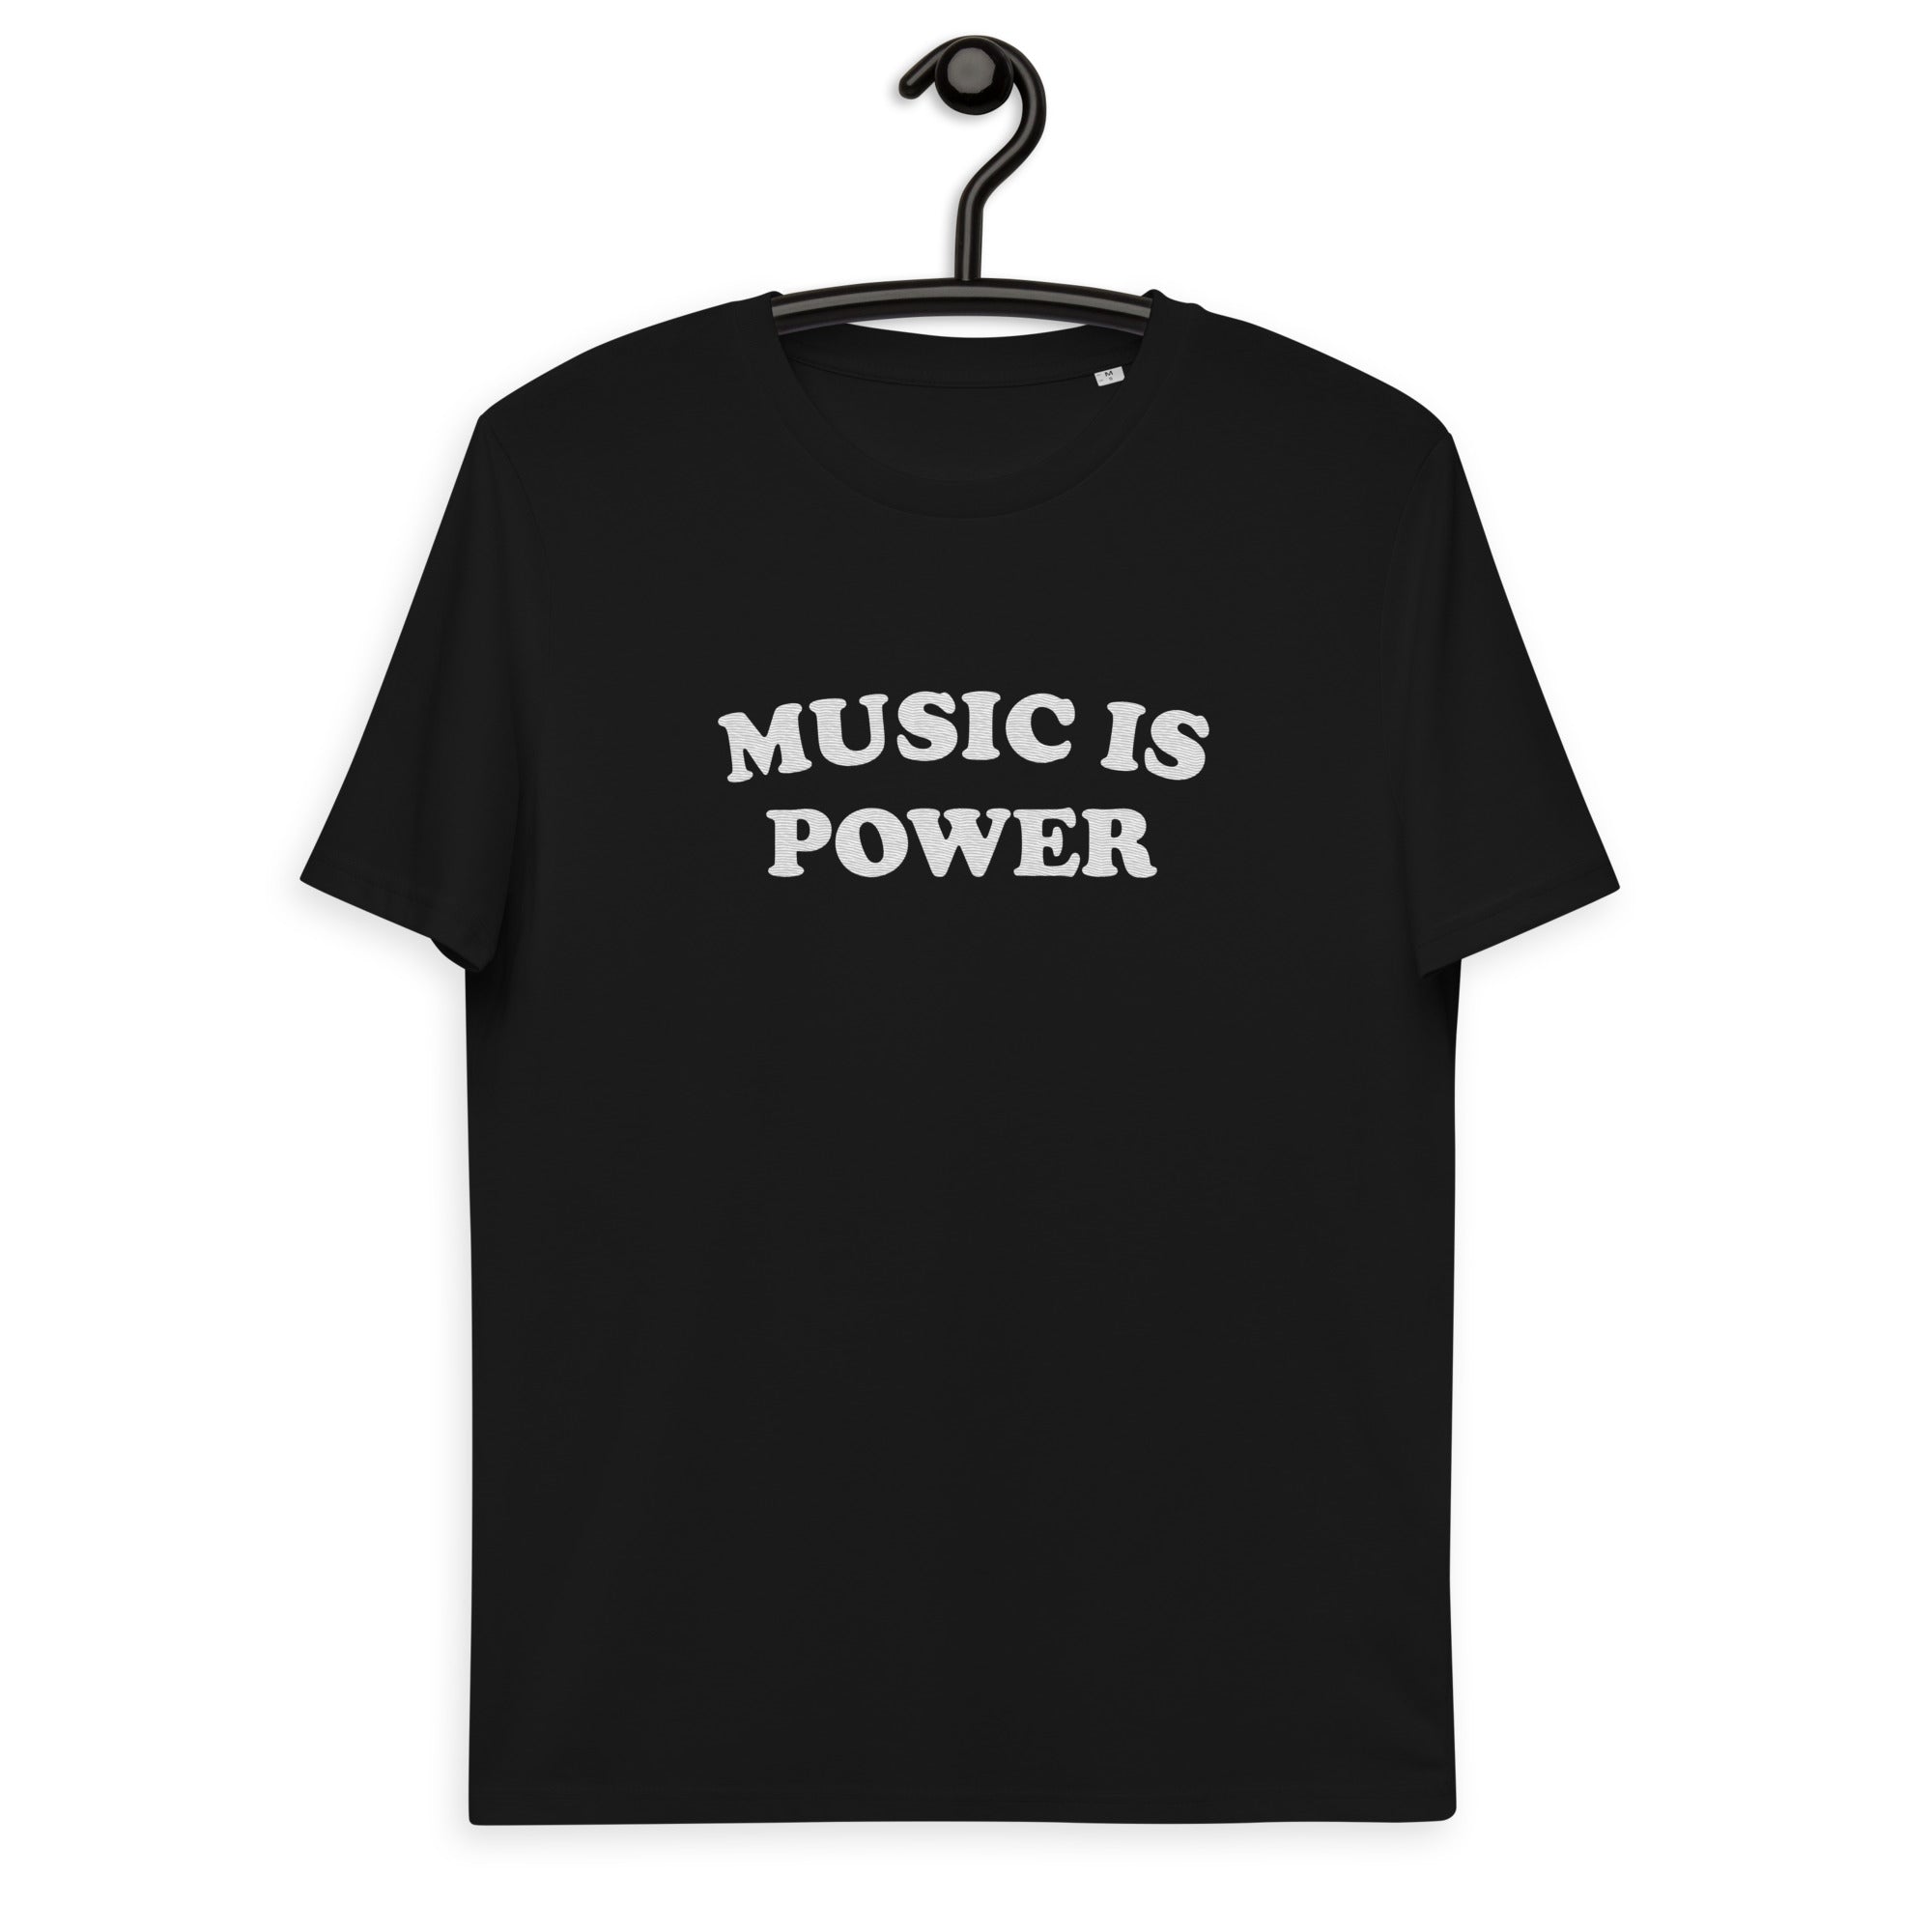 MUSIC IS POWER Embroidered Unisex Organic Cotton T-shirt (white text)